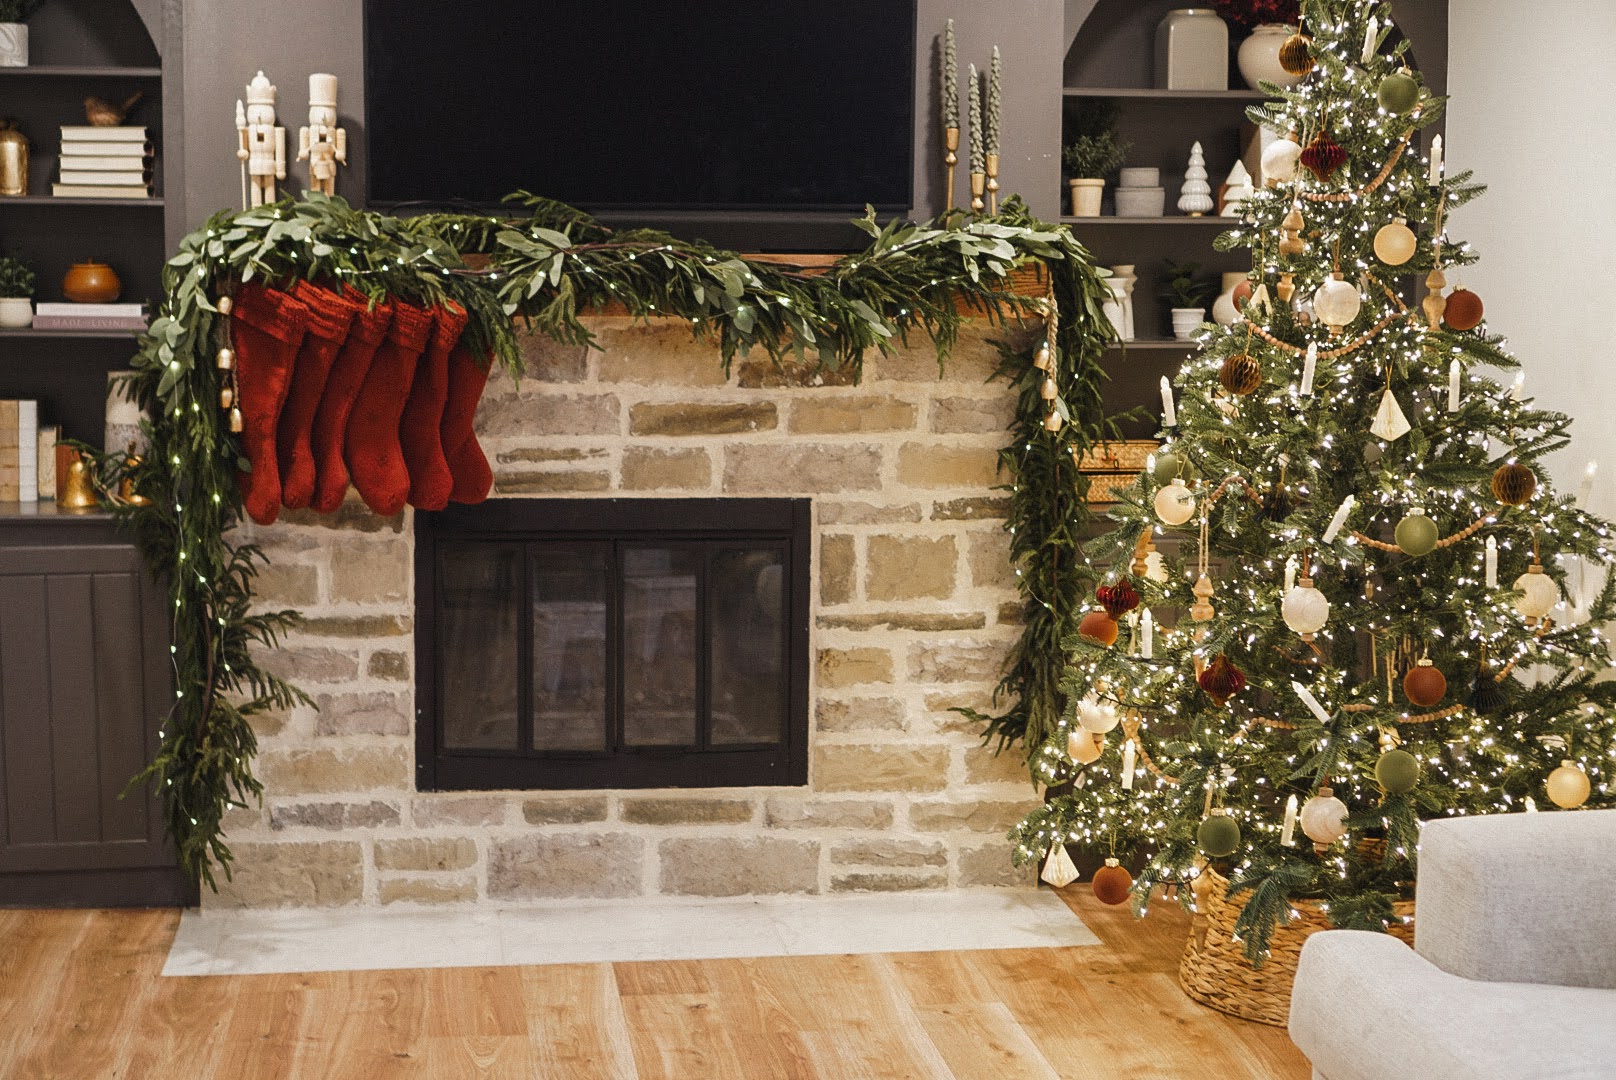 traditional Christmas decor on decorated mantel and tree